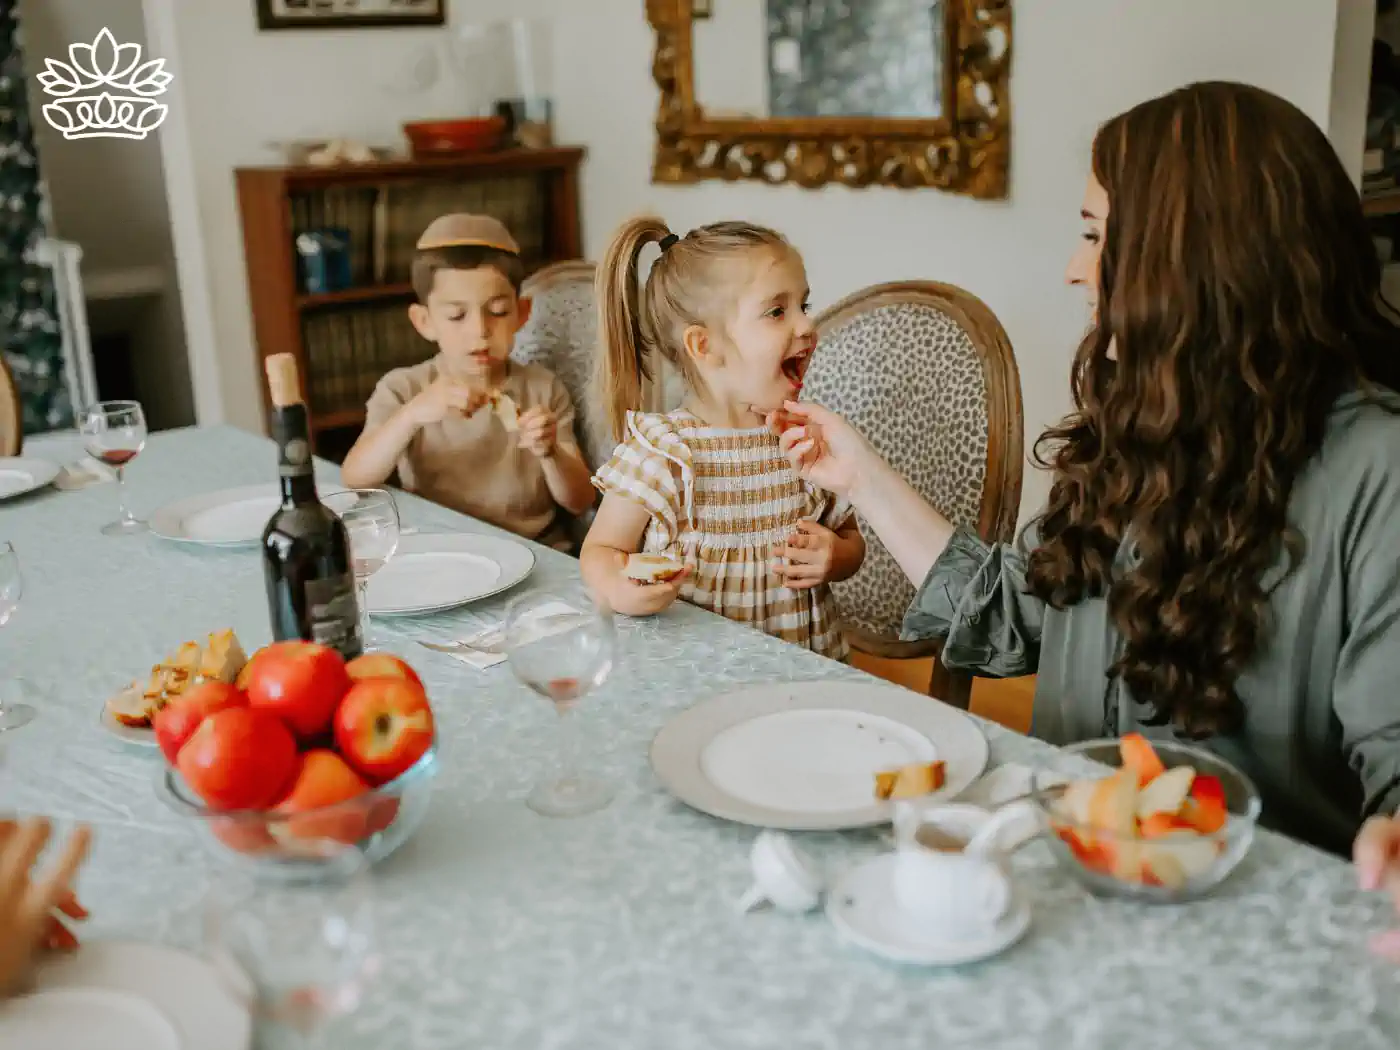 A mother feeding her daughter at a festive Rosh Hashanah table, with another child eating in the background - Fabulous Flowers and Gifts, Rosh Hashanah Flowers Collection.